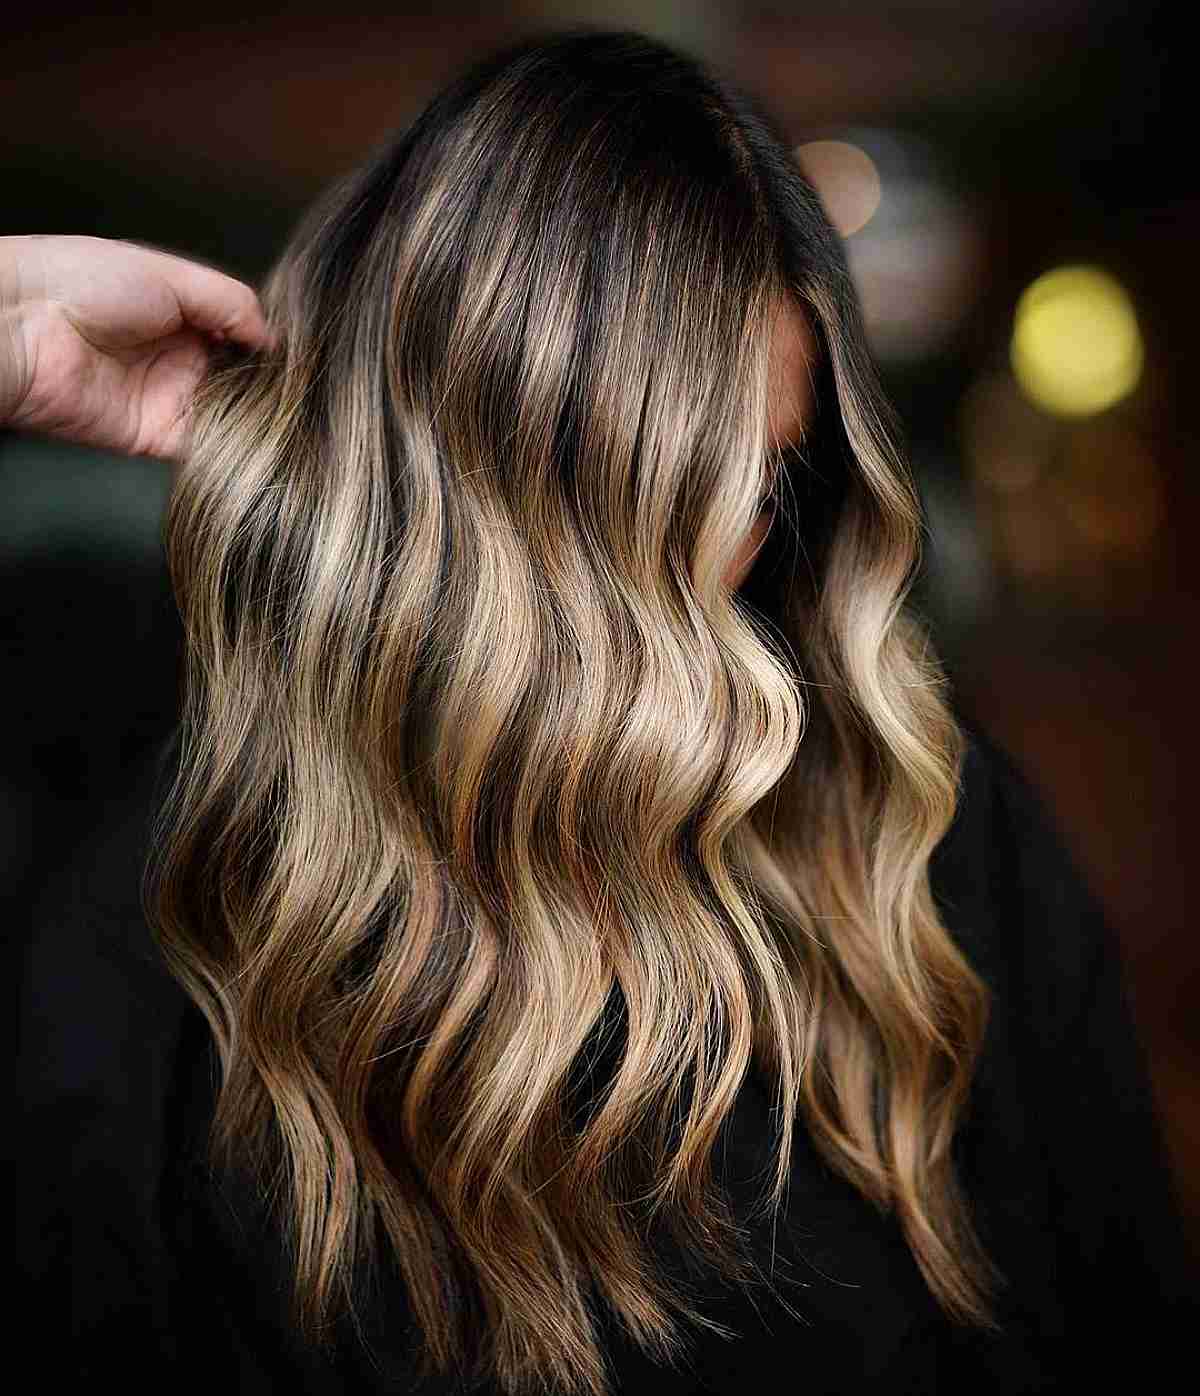 Found: 34These bronde waves are ideal to brighten up hair with blonde highlights. If you've a light to medium brown natural base, ask your colorist for balayage. Or, ask